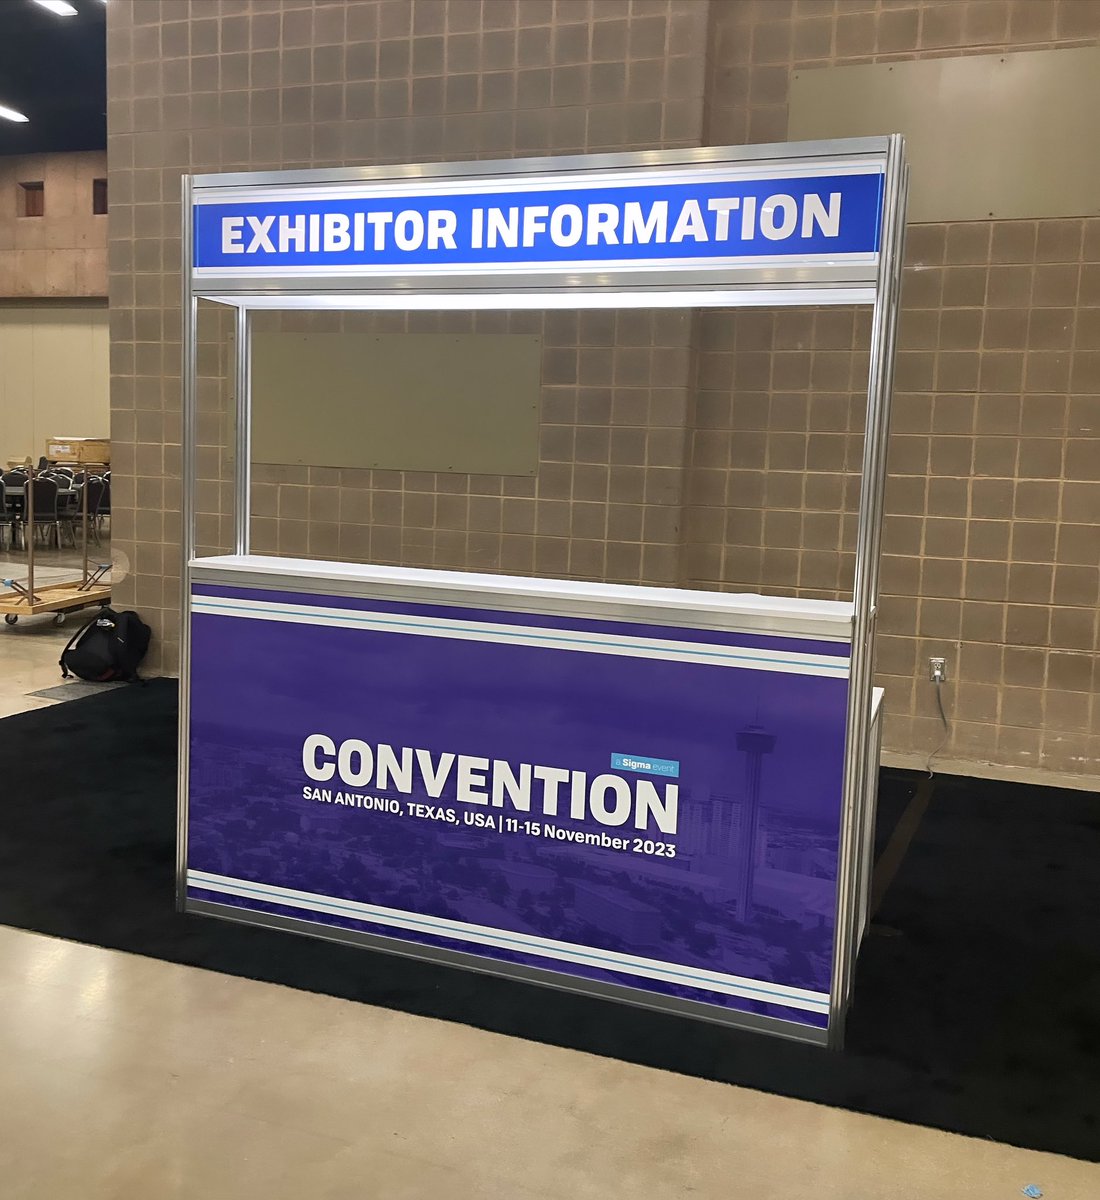 My desk for the past 3-ish days! #SigmaConv23 has been an absolute blast to meet all of our sponsors and 73 exhibitors as well as 1,500+ nurses from around the globe!